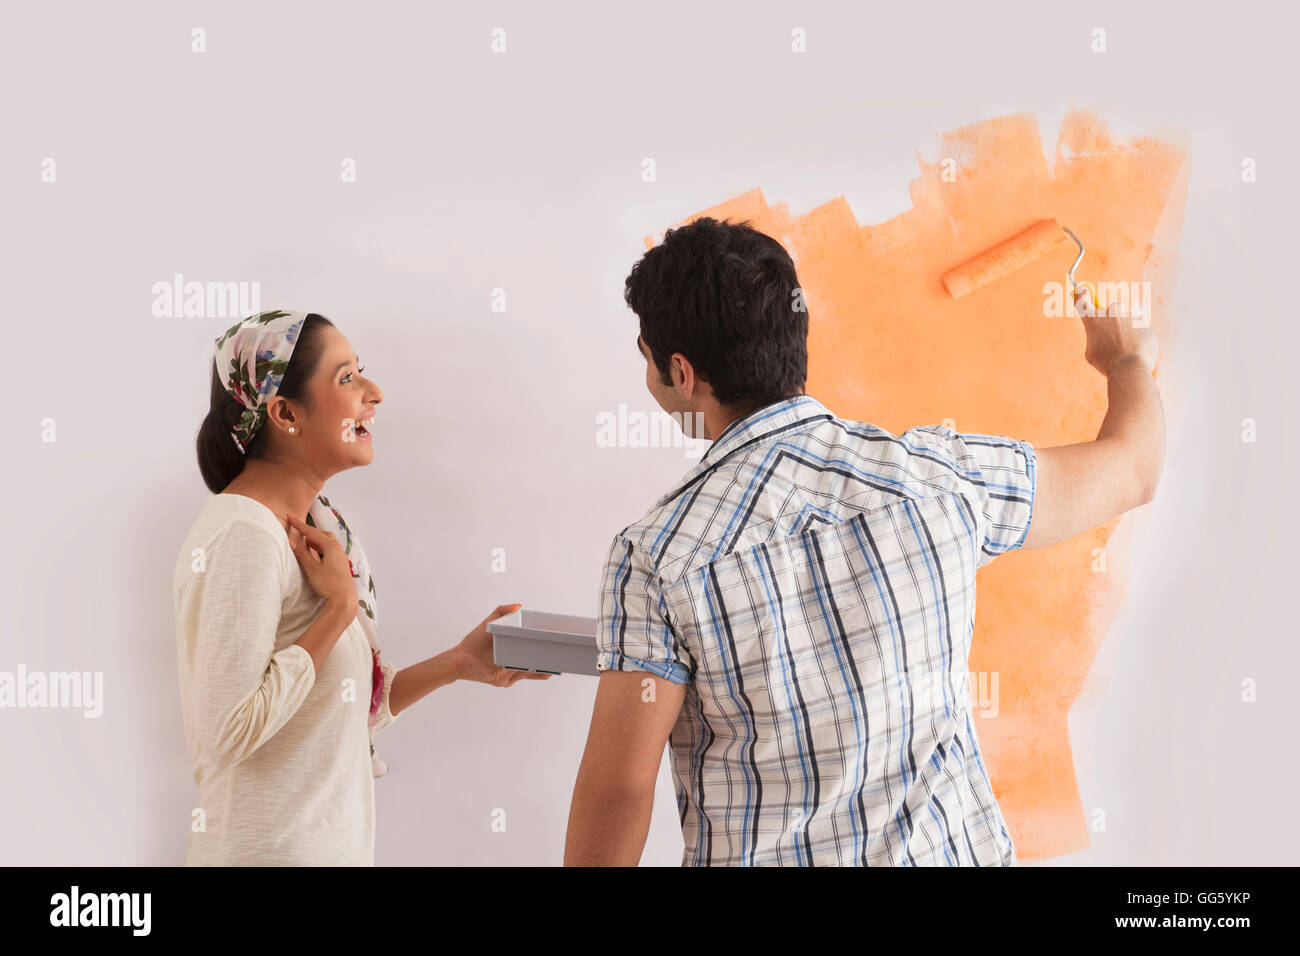 Happy woman looking at man painting wall Banque D'Images